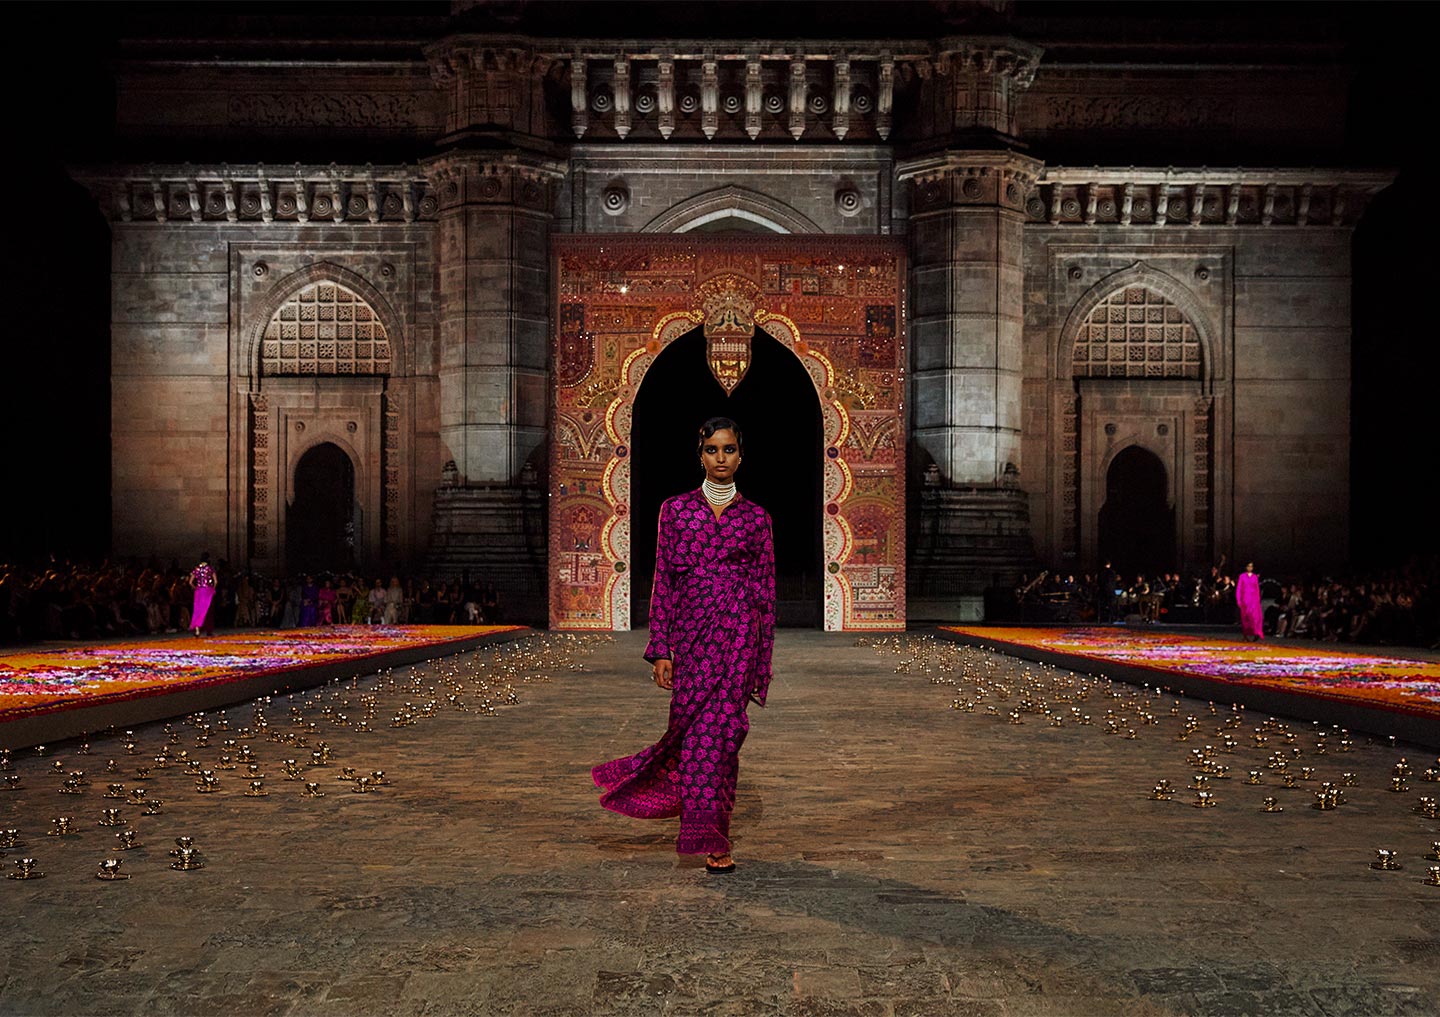 One of the pieces specially produced for Maria Grazia Chiuri's Dior Fall 23 fashion show in Mumbai involved the use of an artisanal technique that traces its roots in India back millennia - block printing